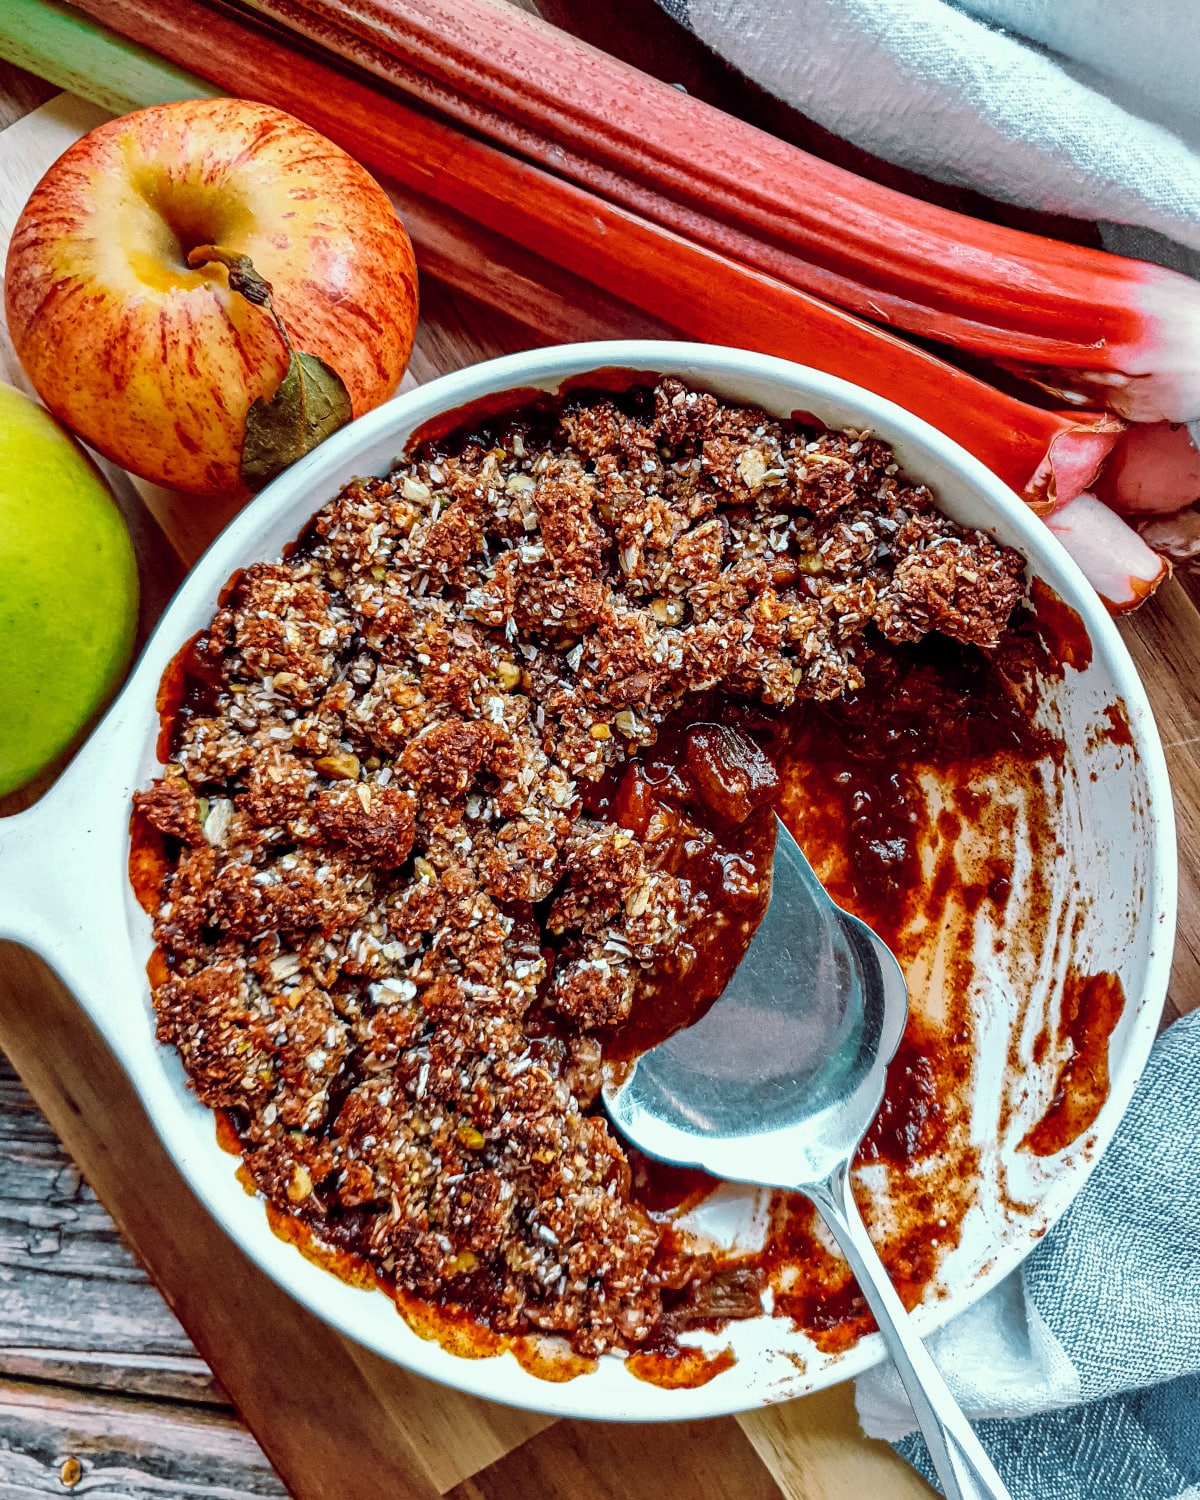 Apple Crumble high in protein